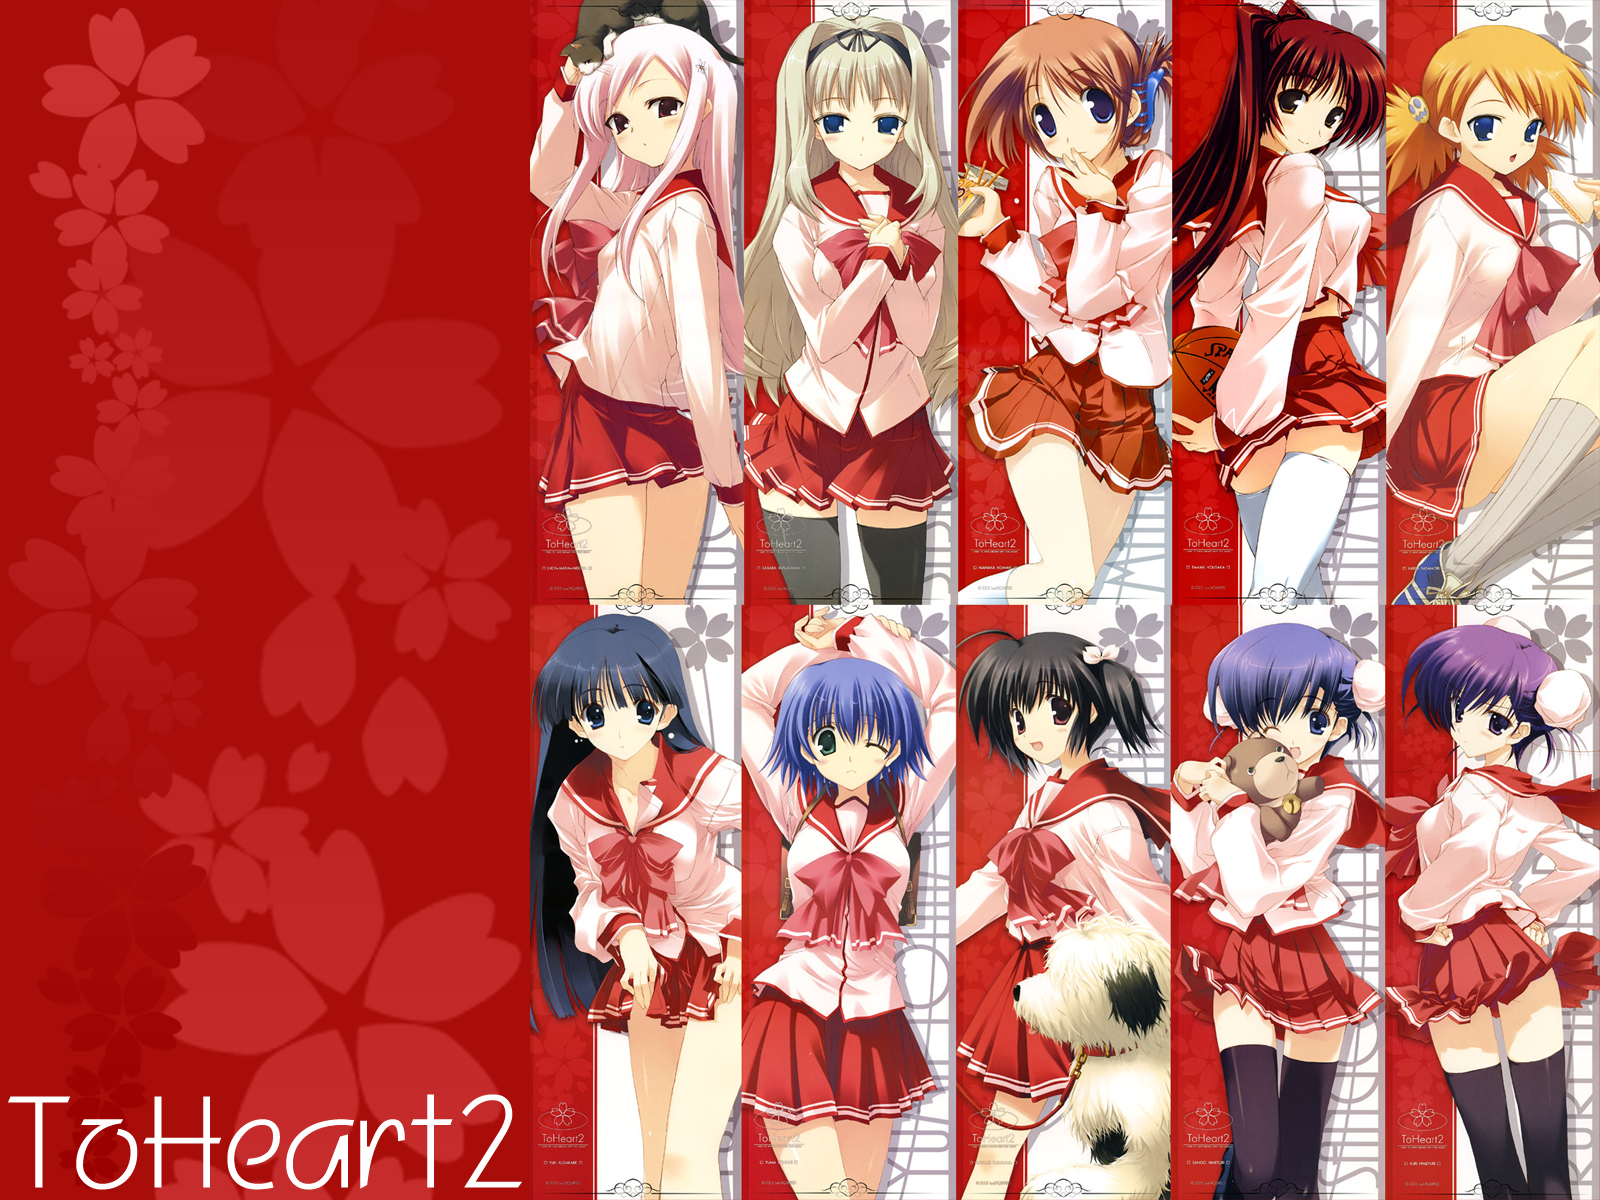 To Heart 2 Pics, Anime Collection